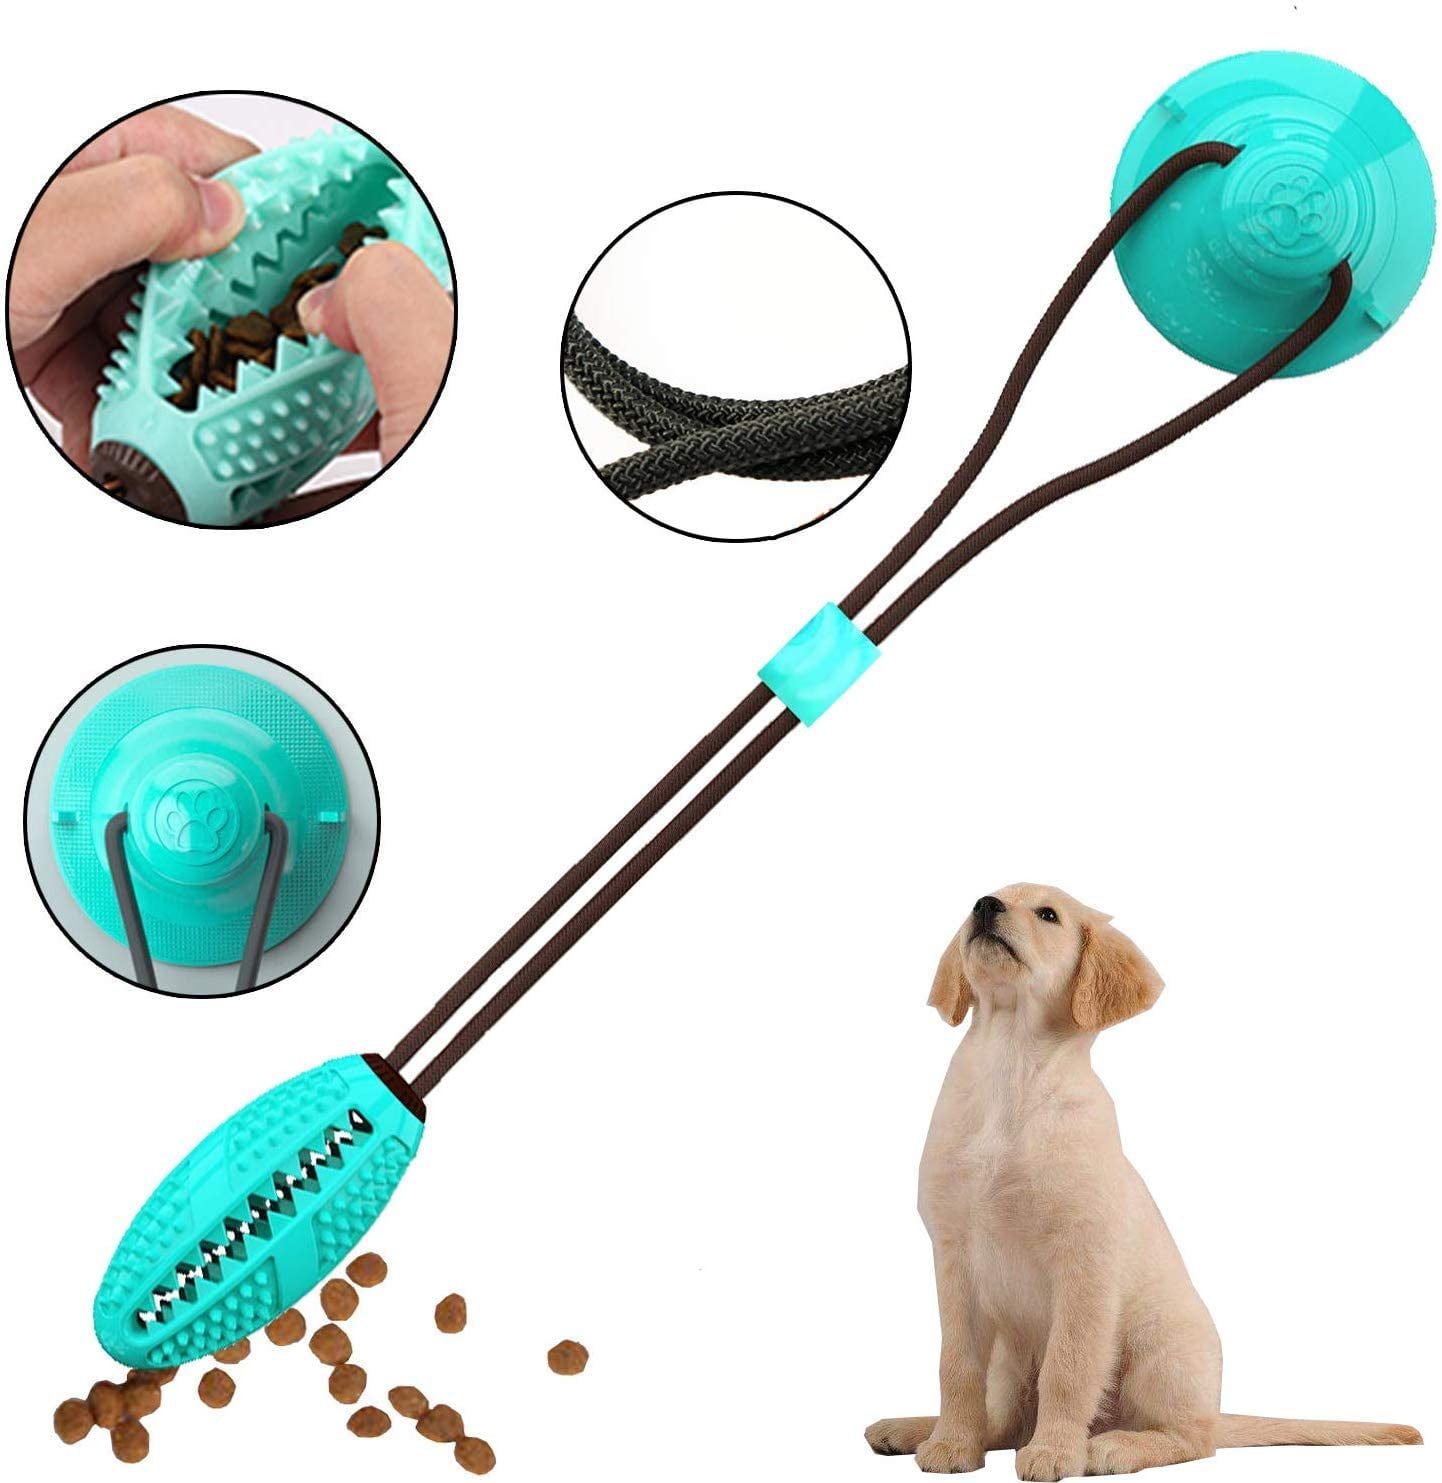 Dental Care for Dogs Puppy，Dog Teeth Cleaning Chew Toy Safe Elasticity Soft Multifunction Pet Molar Bite Toy Tug Rope Ball with Suction Cup Green